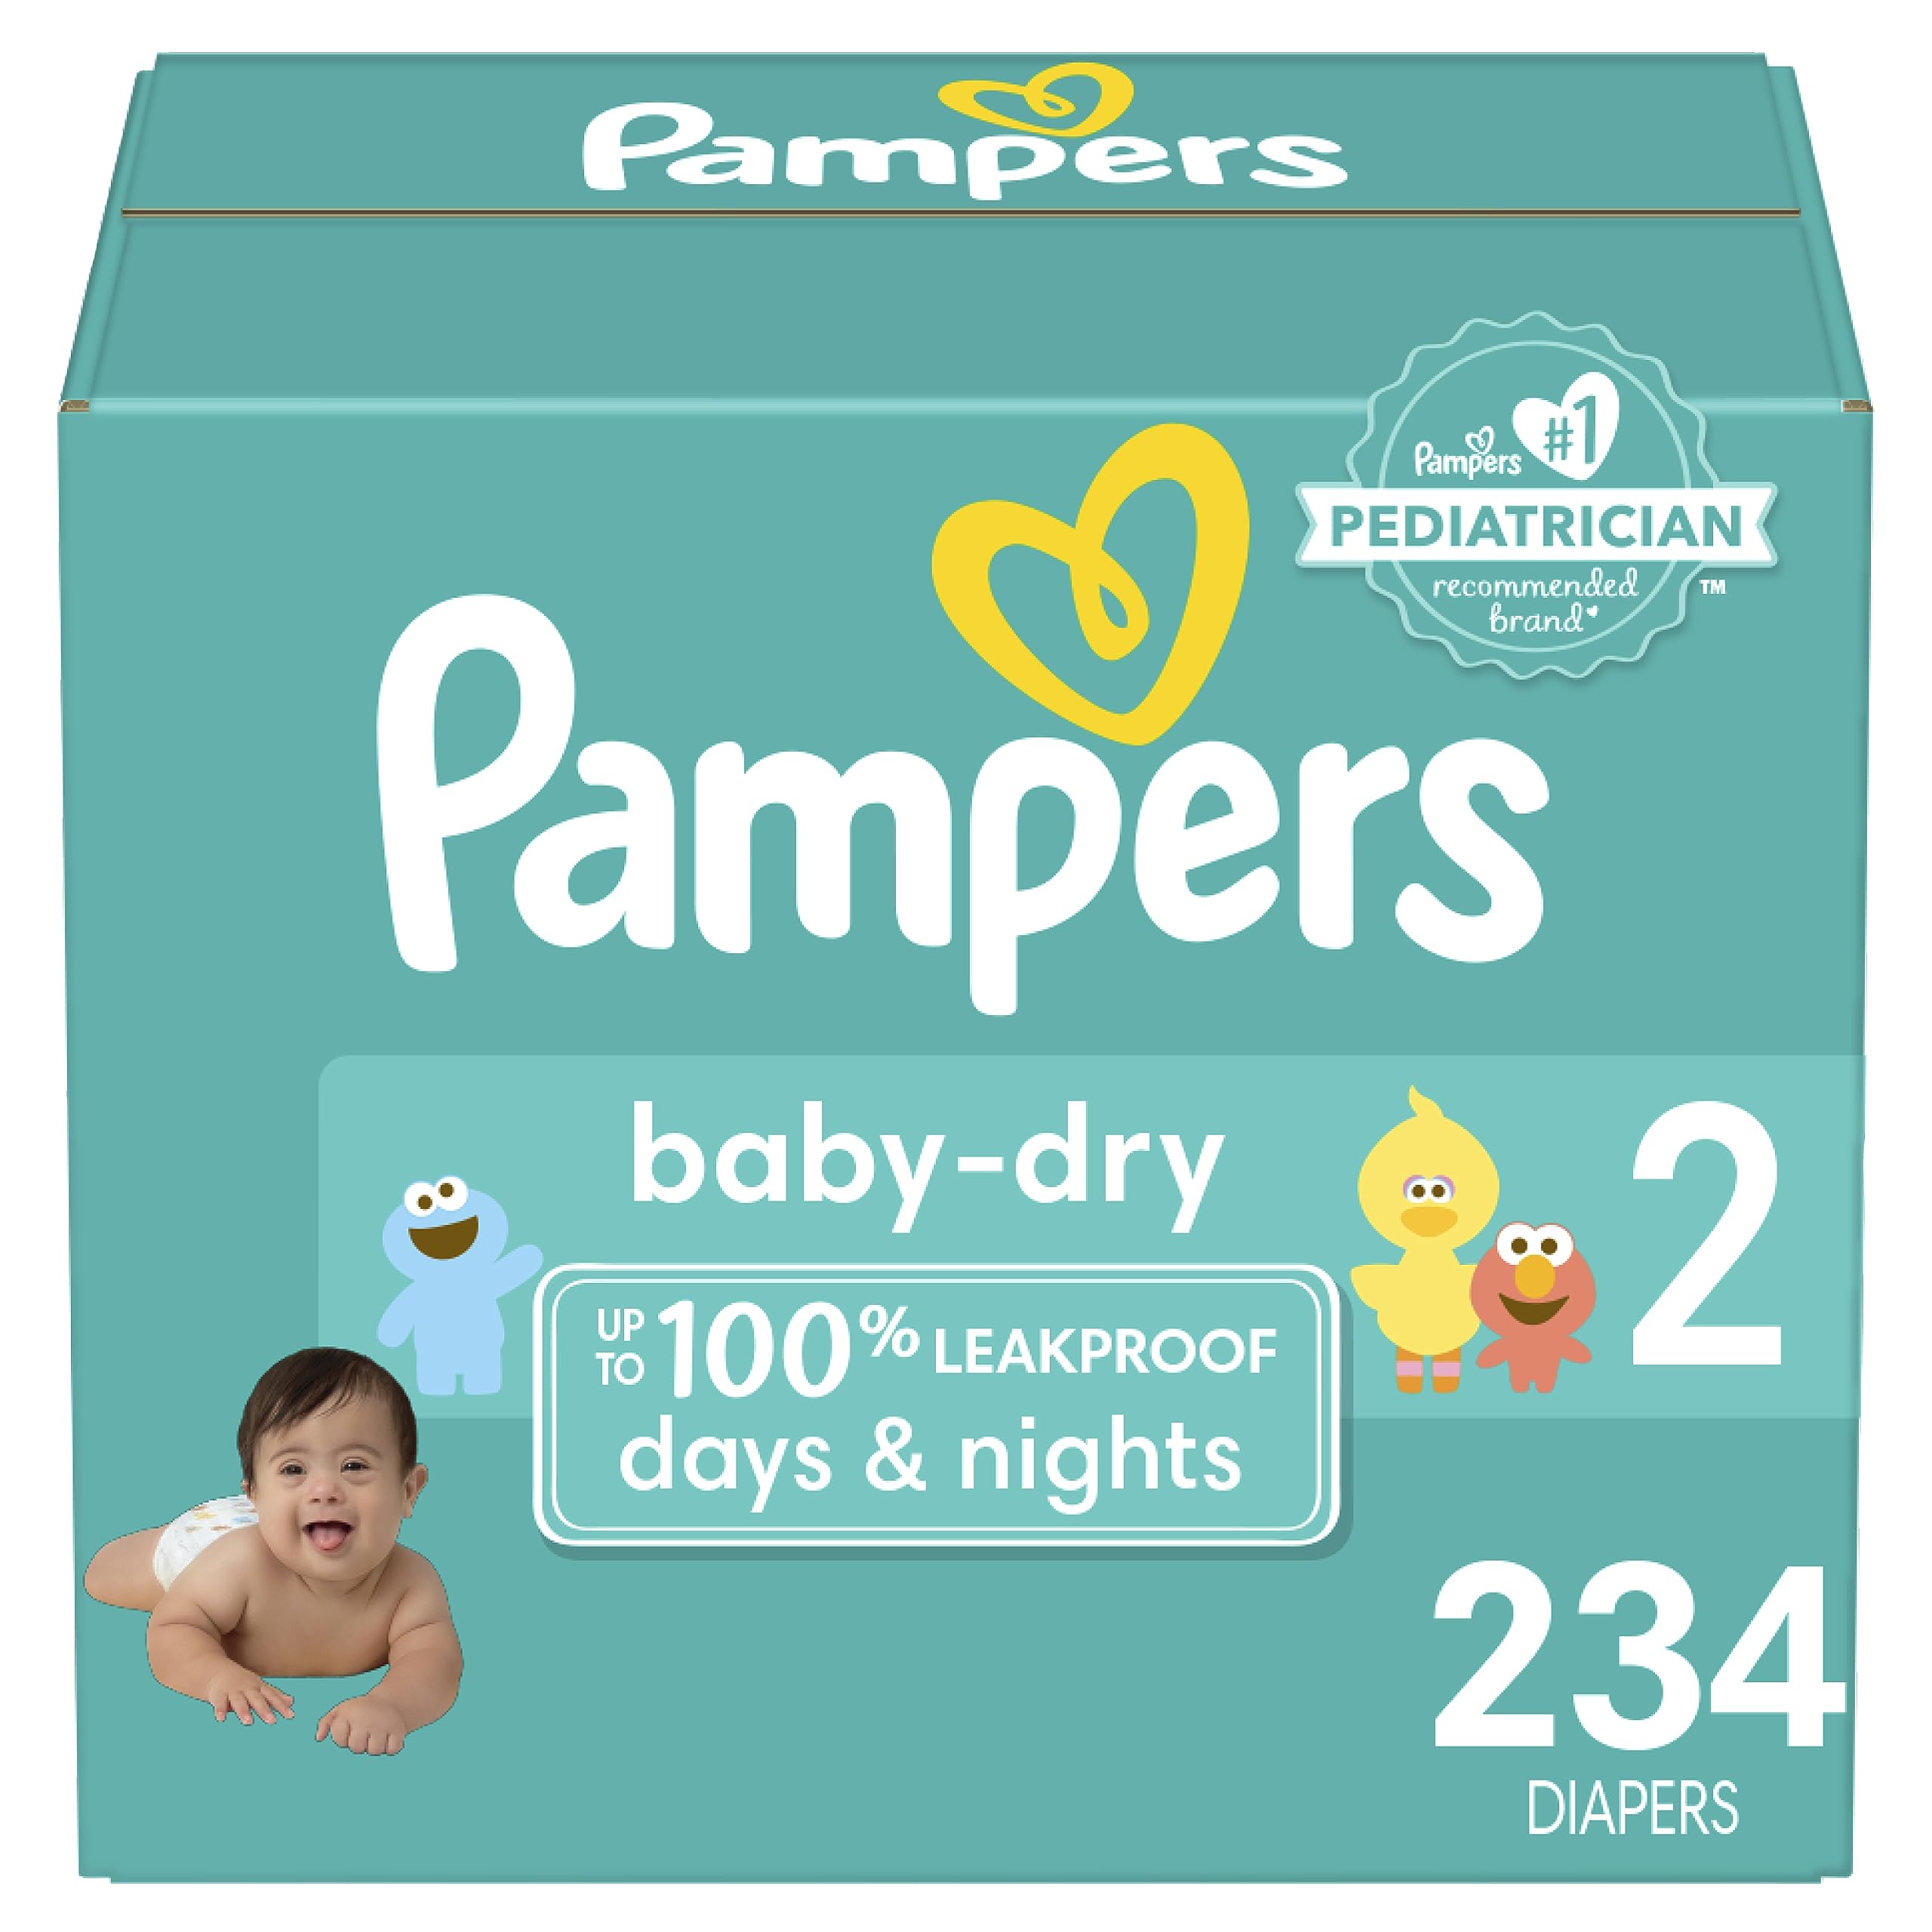 Pampers Baby Dry Diapers - Size 2, 234 Count, Absorbent Disposable Diapers